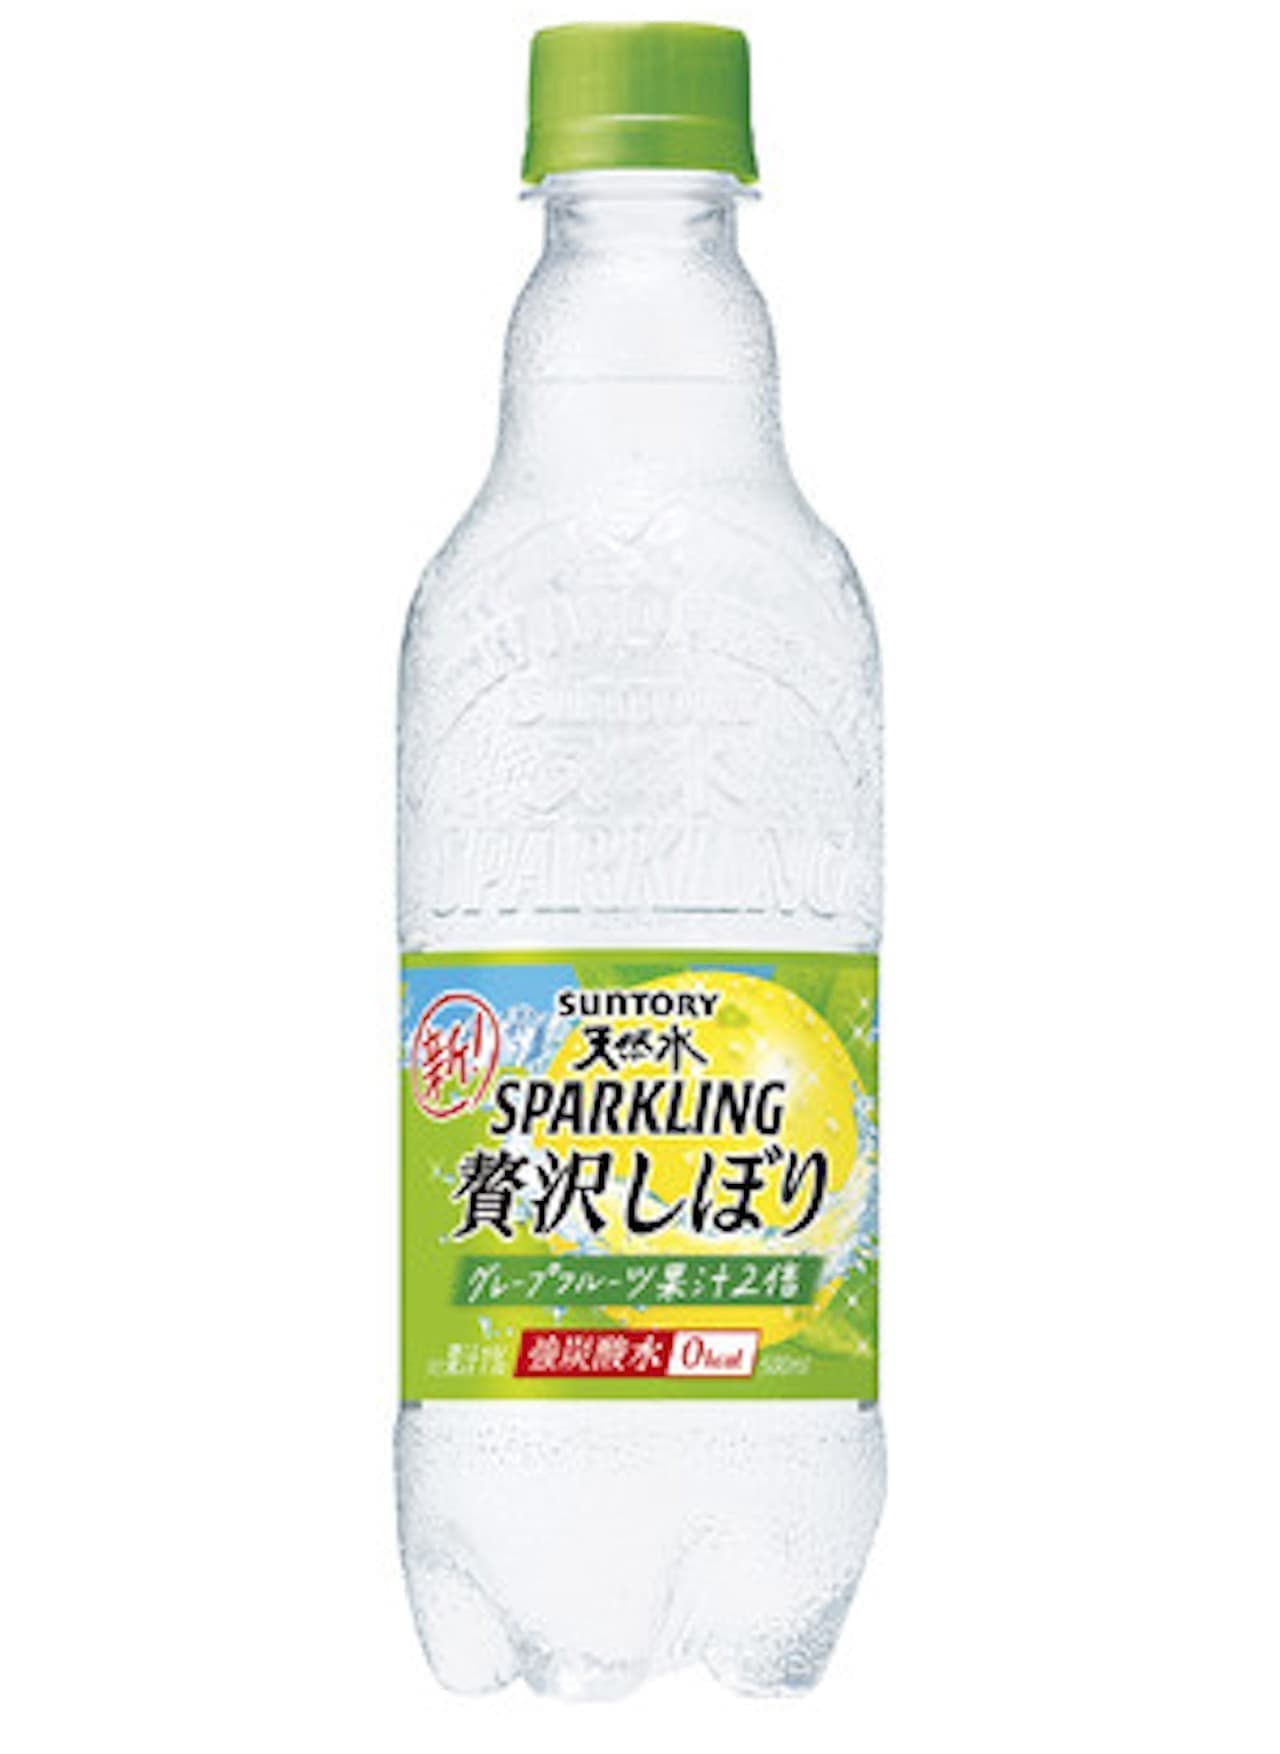 Carbonated water for sweet tooth "Suntory natural water sparkling luxury squeezed grapefruit"